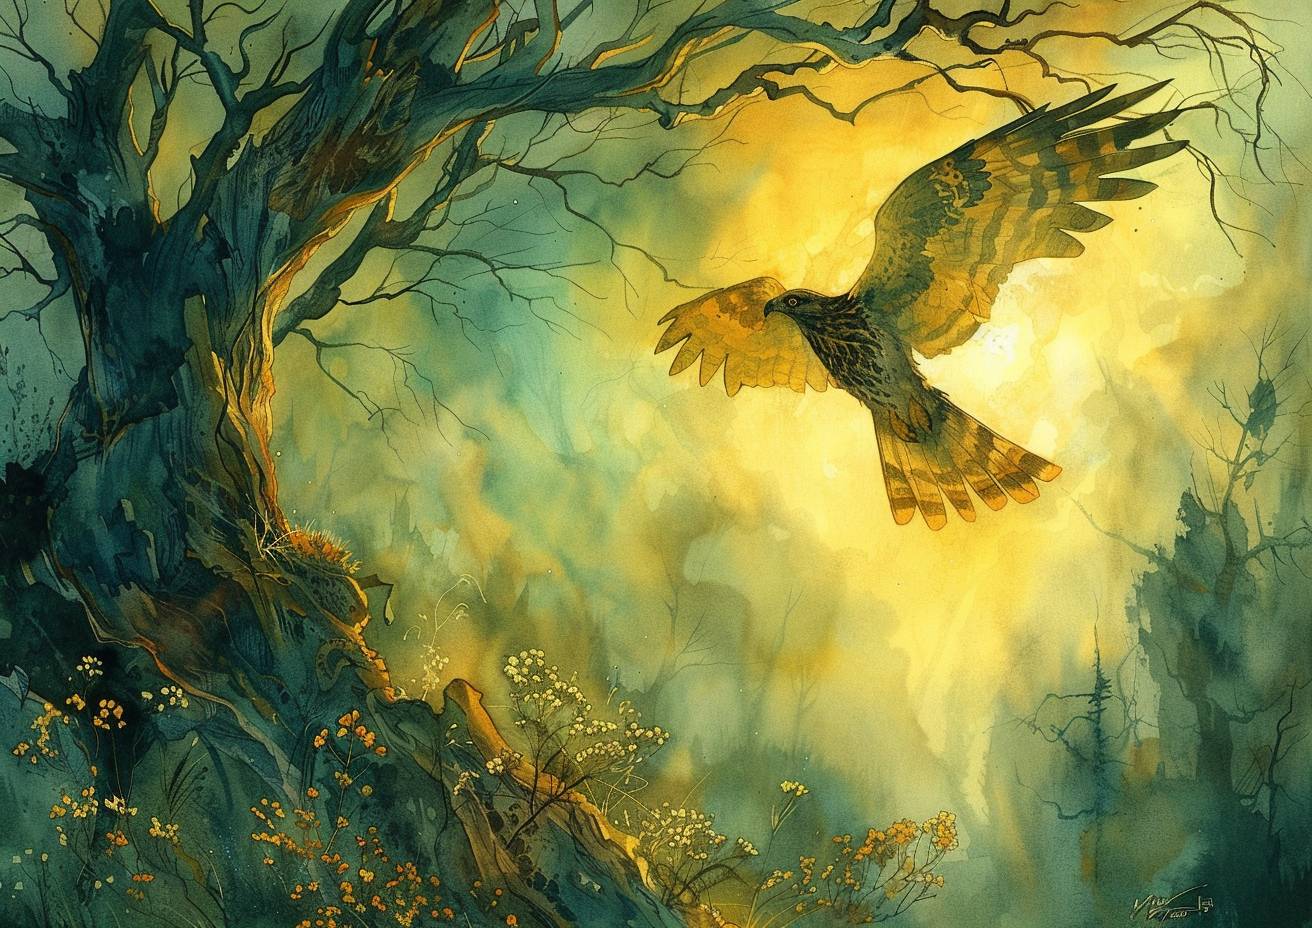 Apocalypsecore landscape, a hawk launches itself from a dead tree, wings strobing in the sunlight, strong visual flow